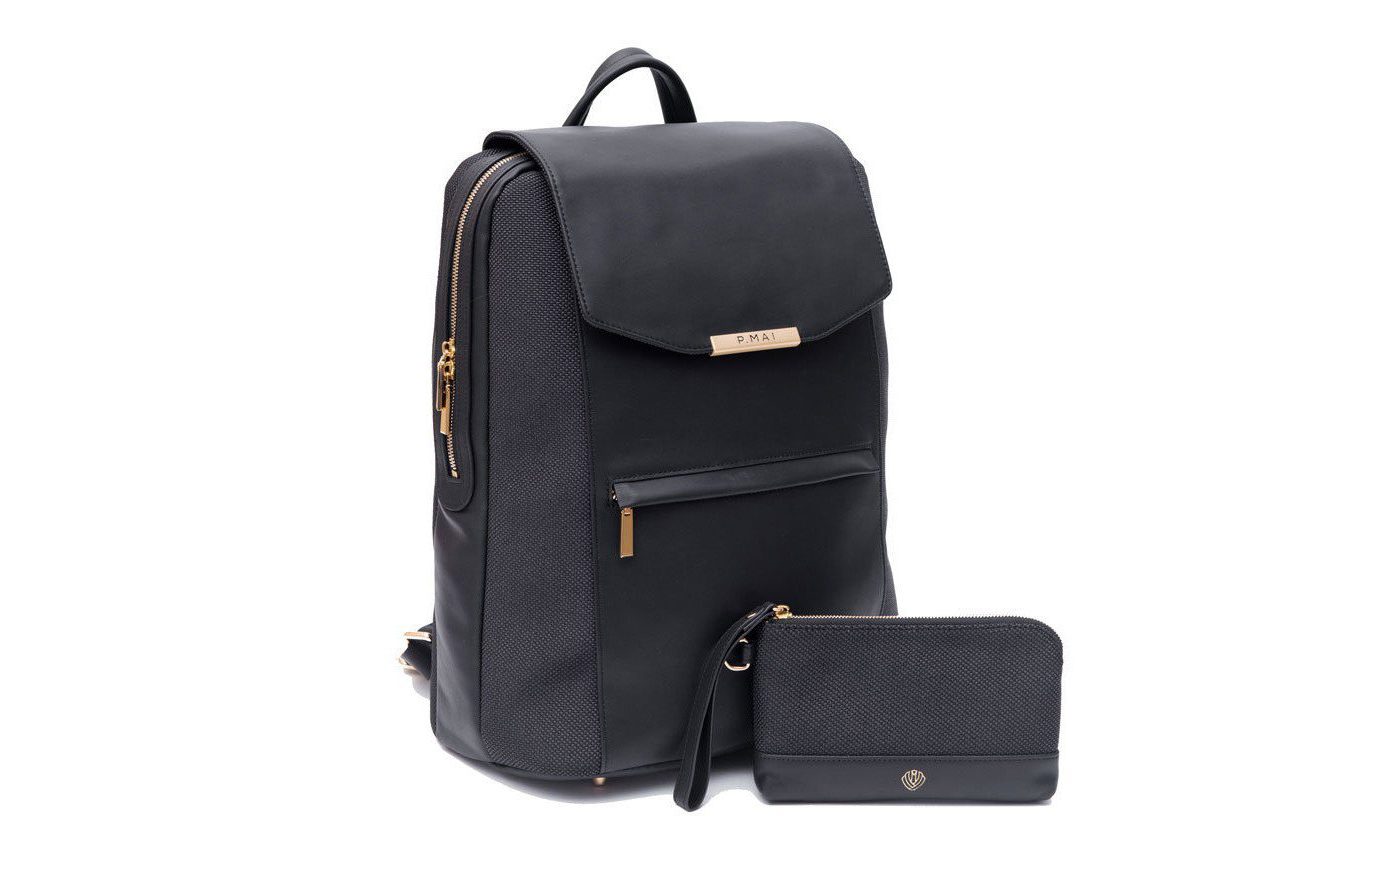 Style + Design luggage suitcase bag piece suit sitting accessory case black product product design baggage luggage & bags hand luggage backpack leather